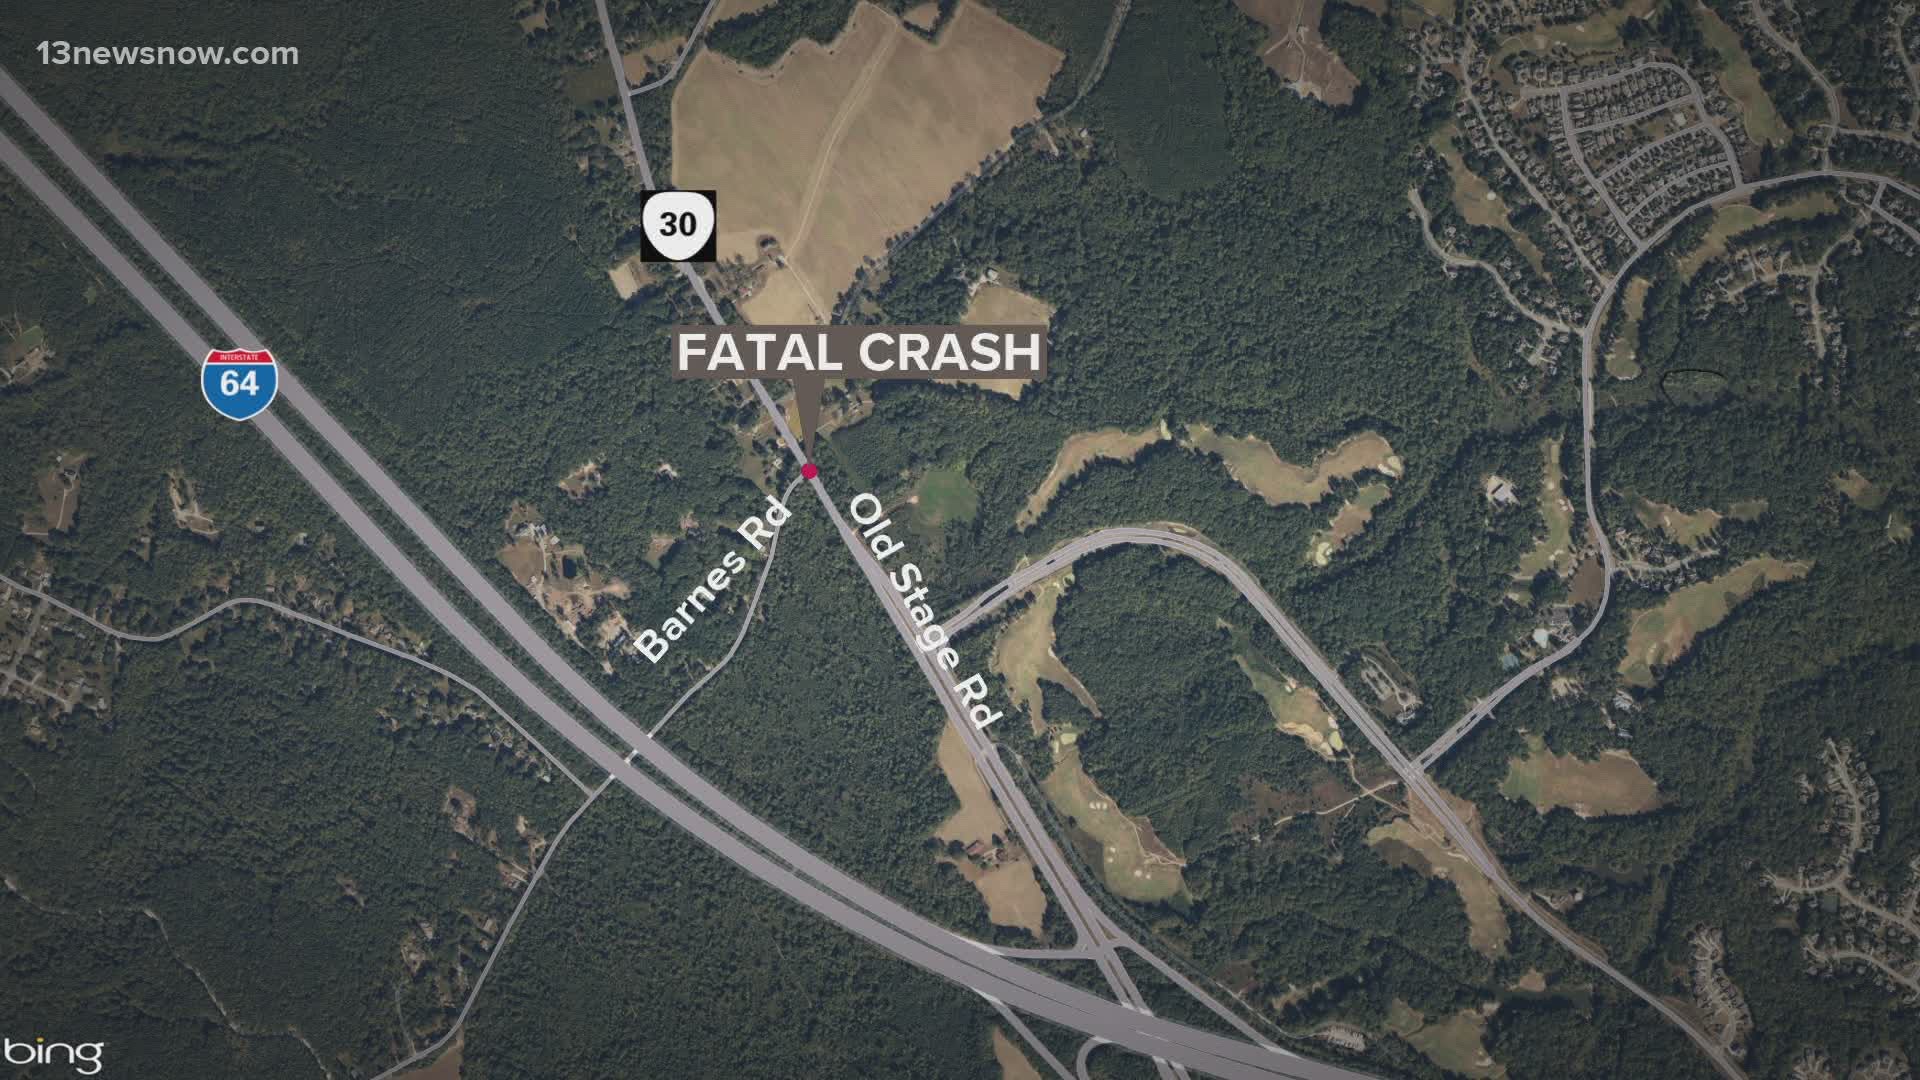 Two people died after a crash involving a truck and a motorcycle in James City County.